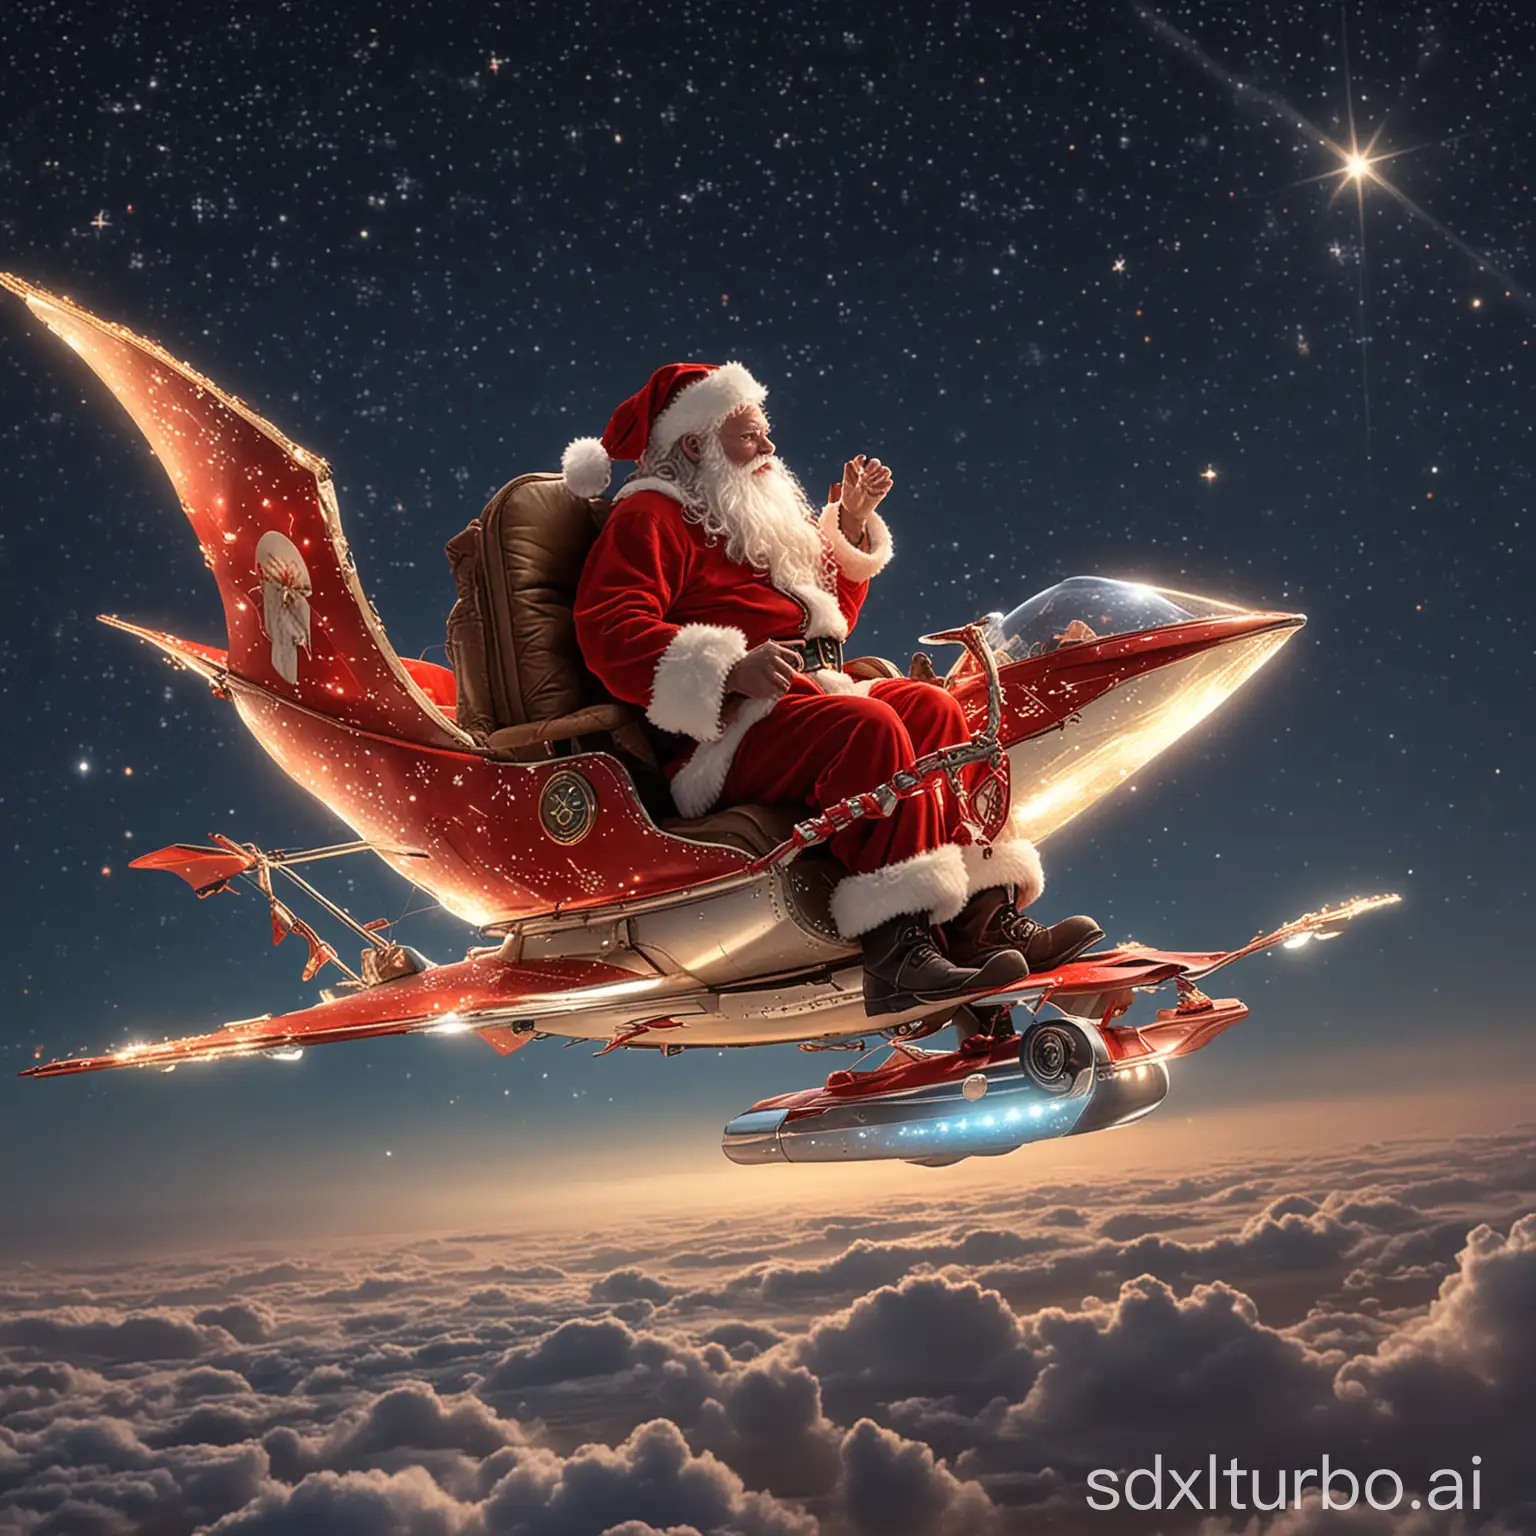 Santa-Claus-Riding-a-Glittering-Manned-Gliding-Vehicle-in-the-Night-Sky